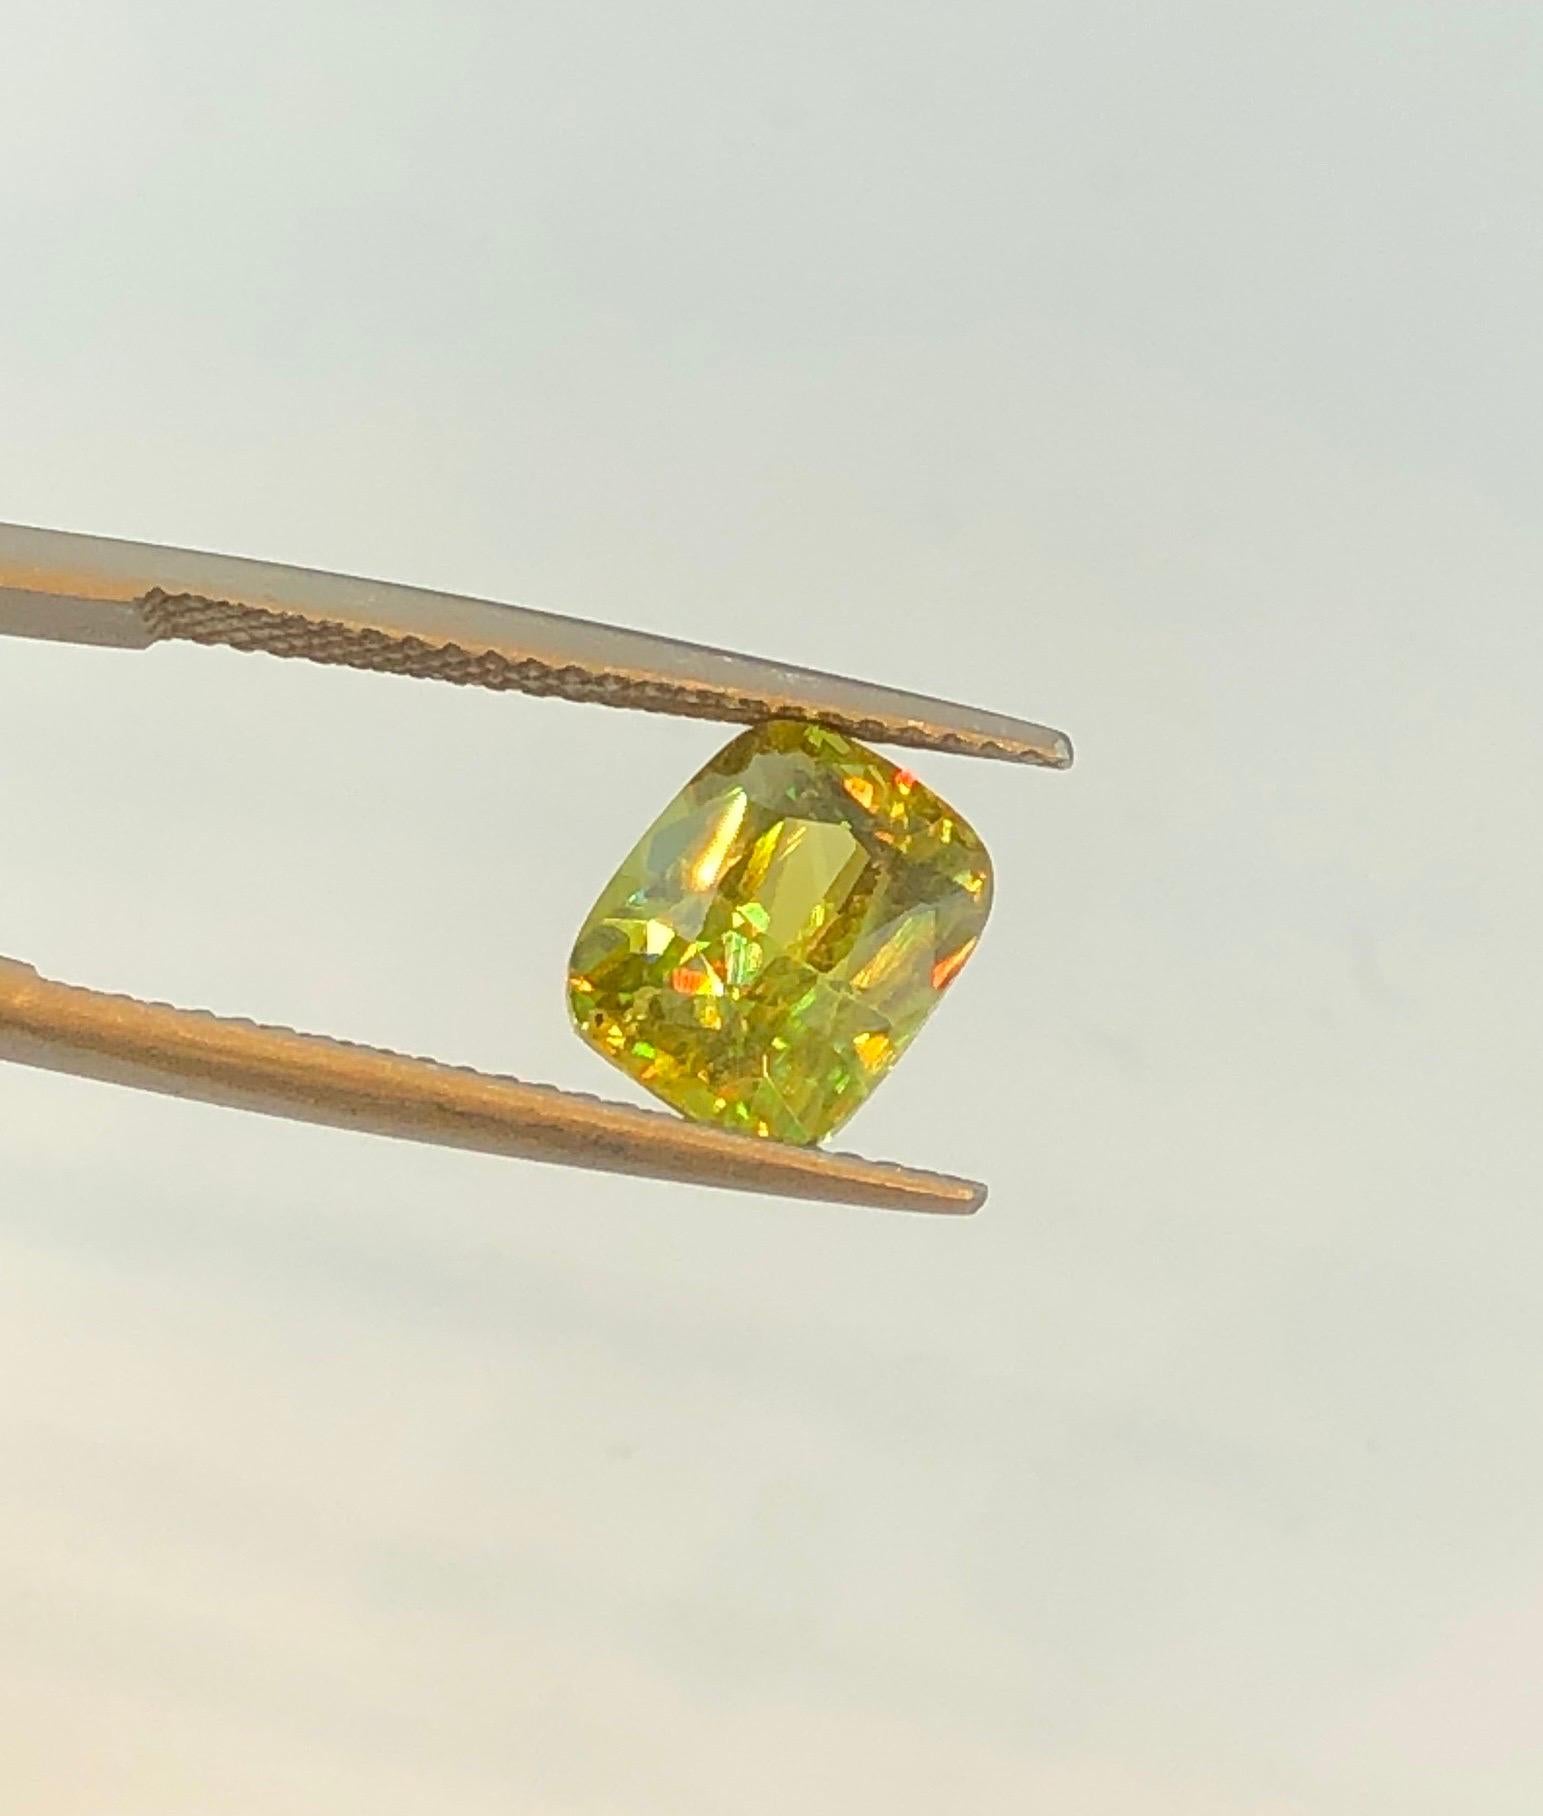 We are thrilled to present a beautiful 2.5-carat yellowish-green sphene, perfect for a dazzling ring. Known for its exceptional fire, this gemstone truly comes alive in artificial lighting, displaying more light dispersion than a diamond. Experience